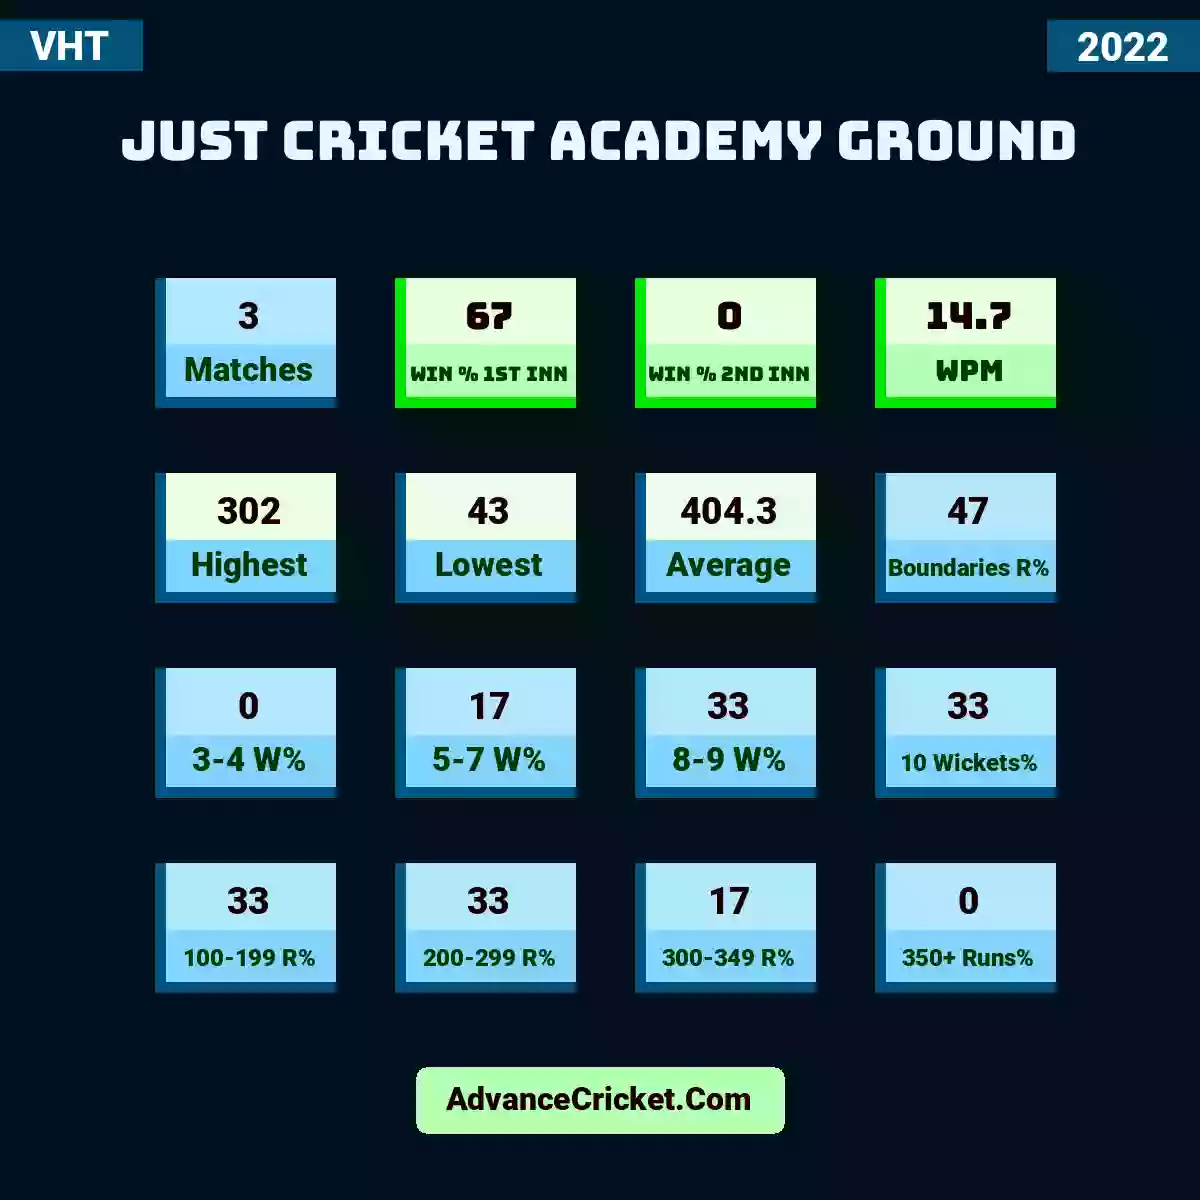 Image showing Just Cricket Academy Ground with Matches: 3, Win % 1st Inn: 67, Win % 2nd Inn: 0, WPM: 14.7, Highest: 302, Lowest: 43, Average: 404.3, Boundaries R%: 47, 3-4 W%: 0, 5-7 W%: 17, 8-9 W%: 33, 10 Wickets%: 33, 100-199 R%: 33, 200-299 R%: 33, 300-349 R%: 17, 350+ Runs%: 0.